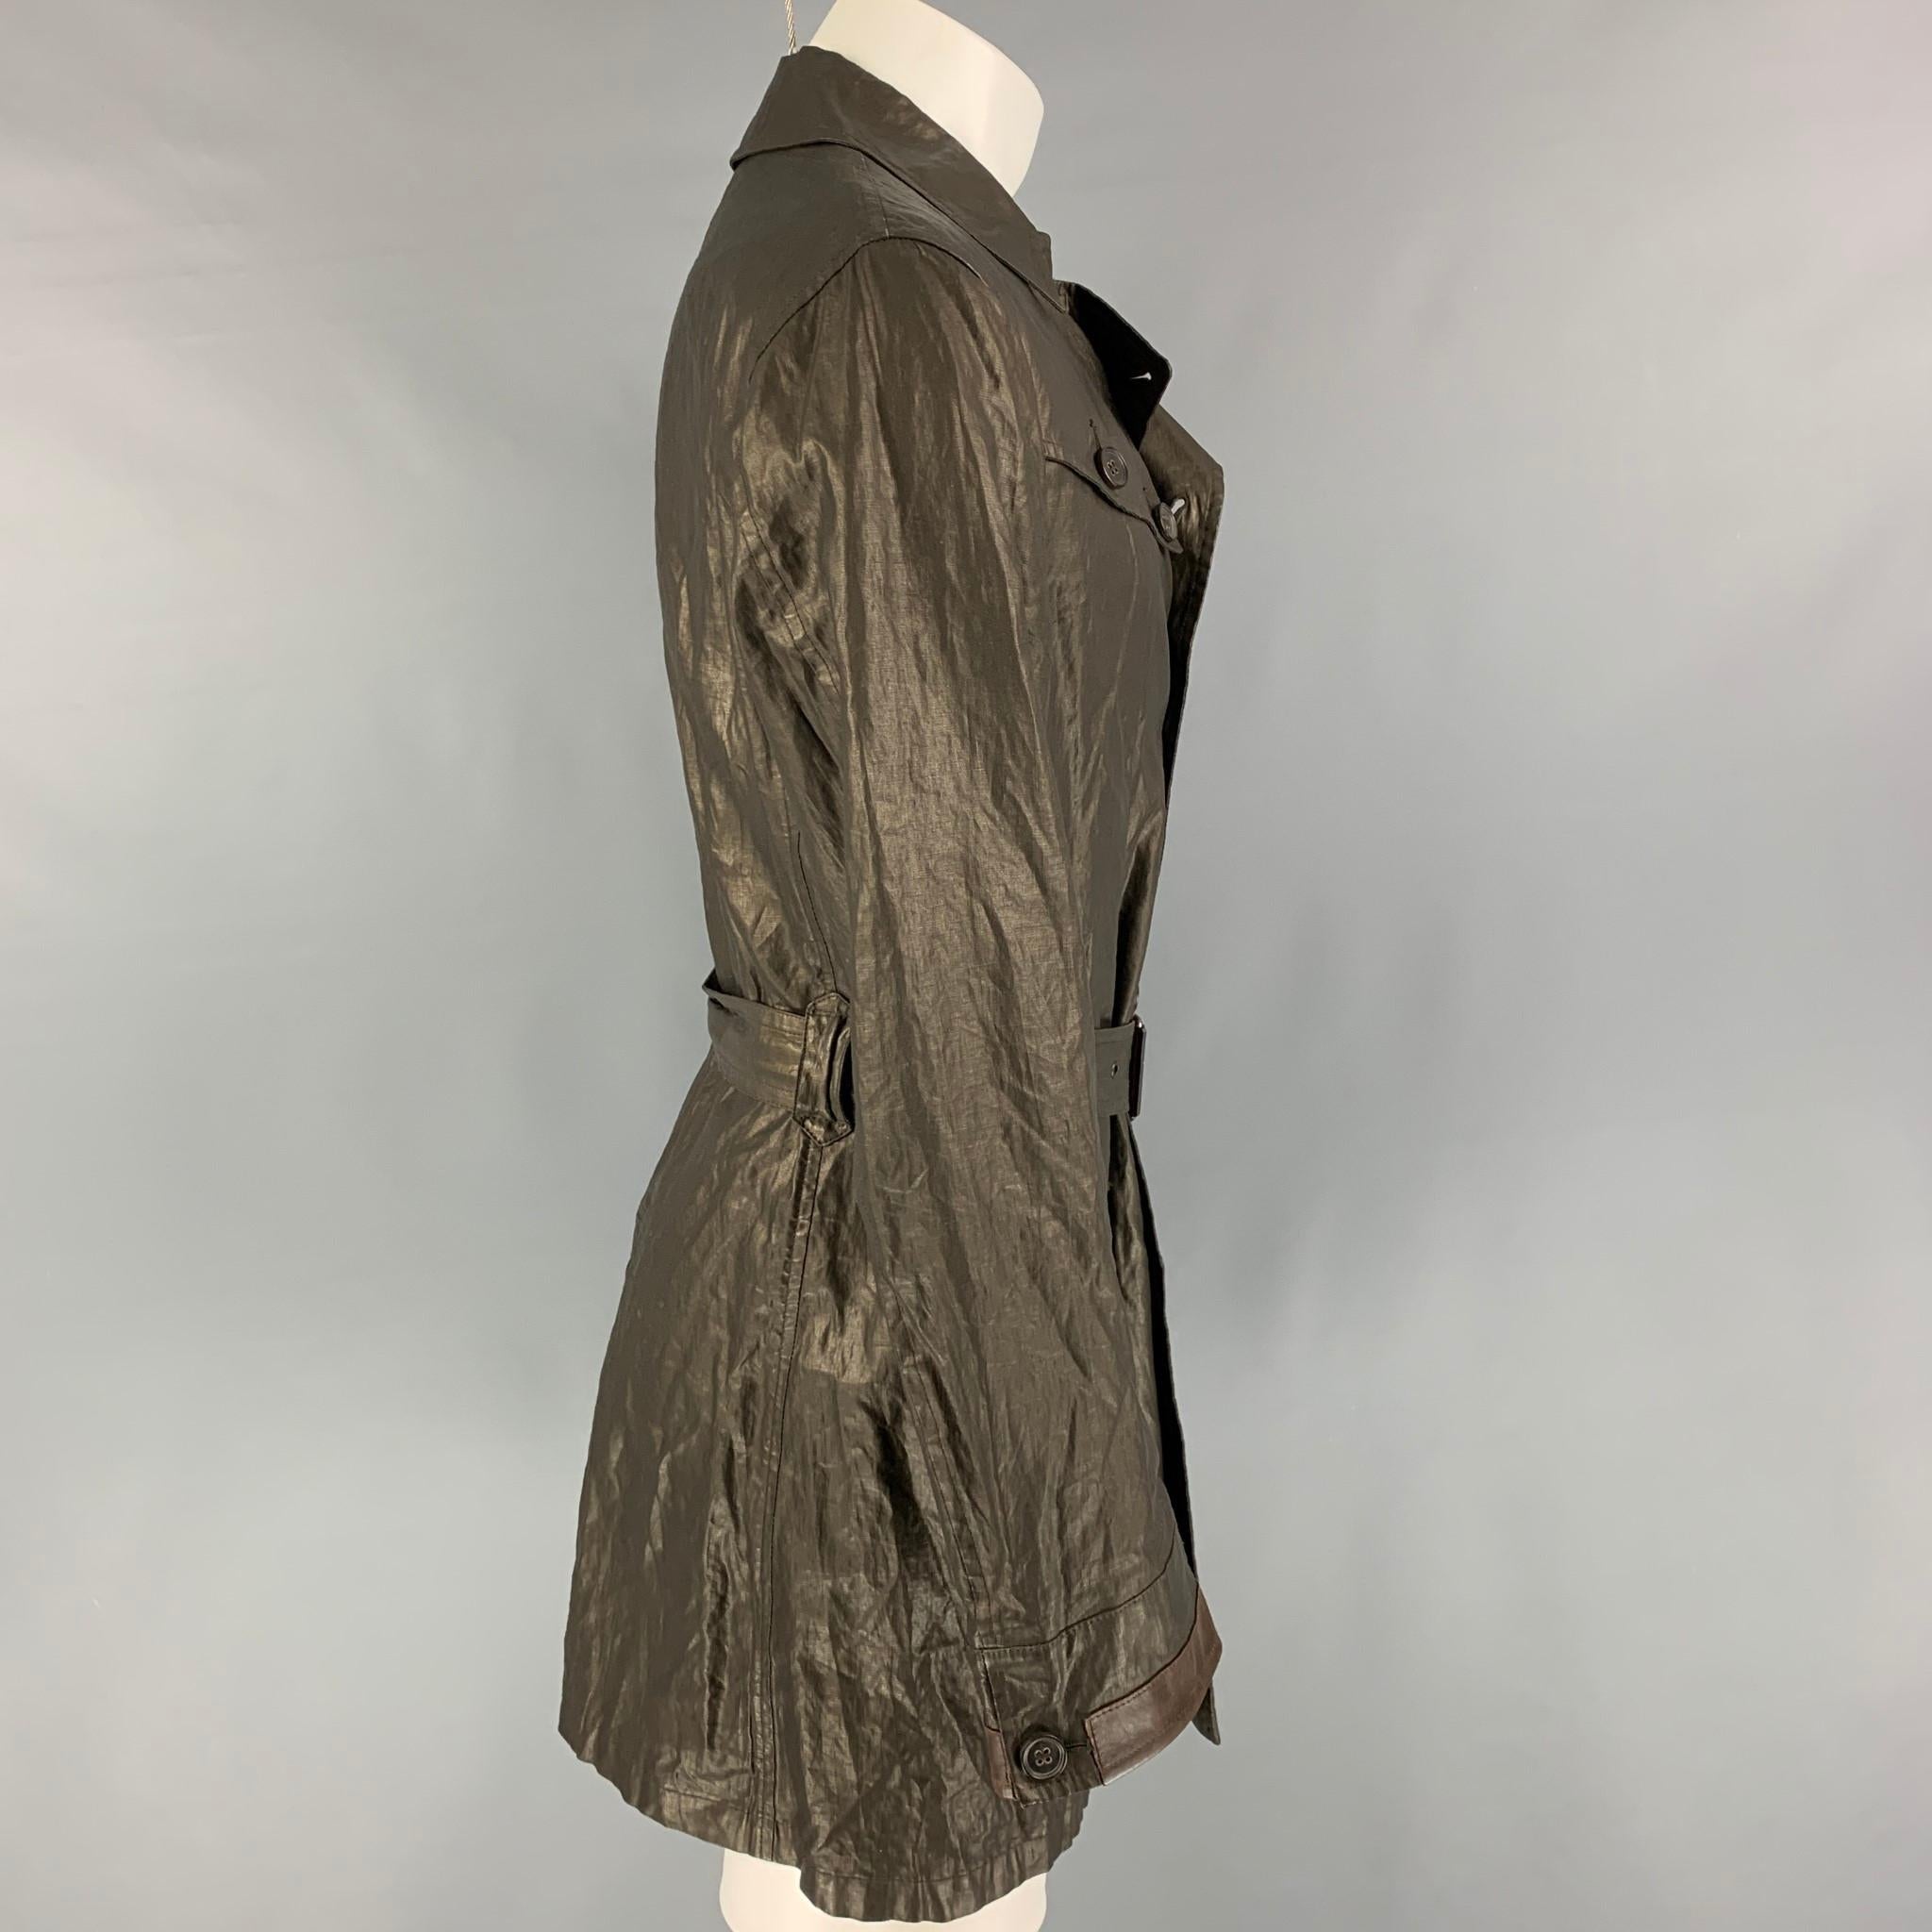 JOHN VARVATOS trench coat comes in a olive linen blend featuring a belted style, flap pockets, notch lapel, and a single breasted closure. Made in Italy. 

Very Good Pre-Owned Condition.
Marked: 50

Measurements:

Shoulder: 18.5 in.
Chest: 44